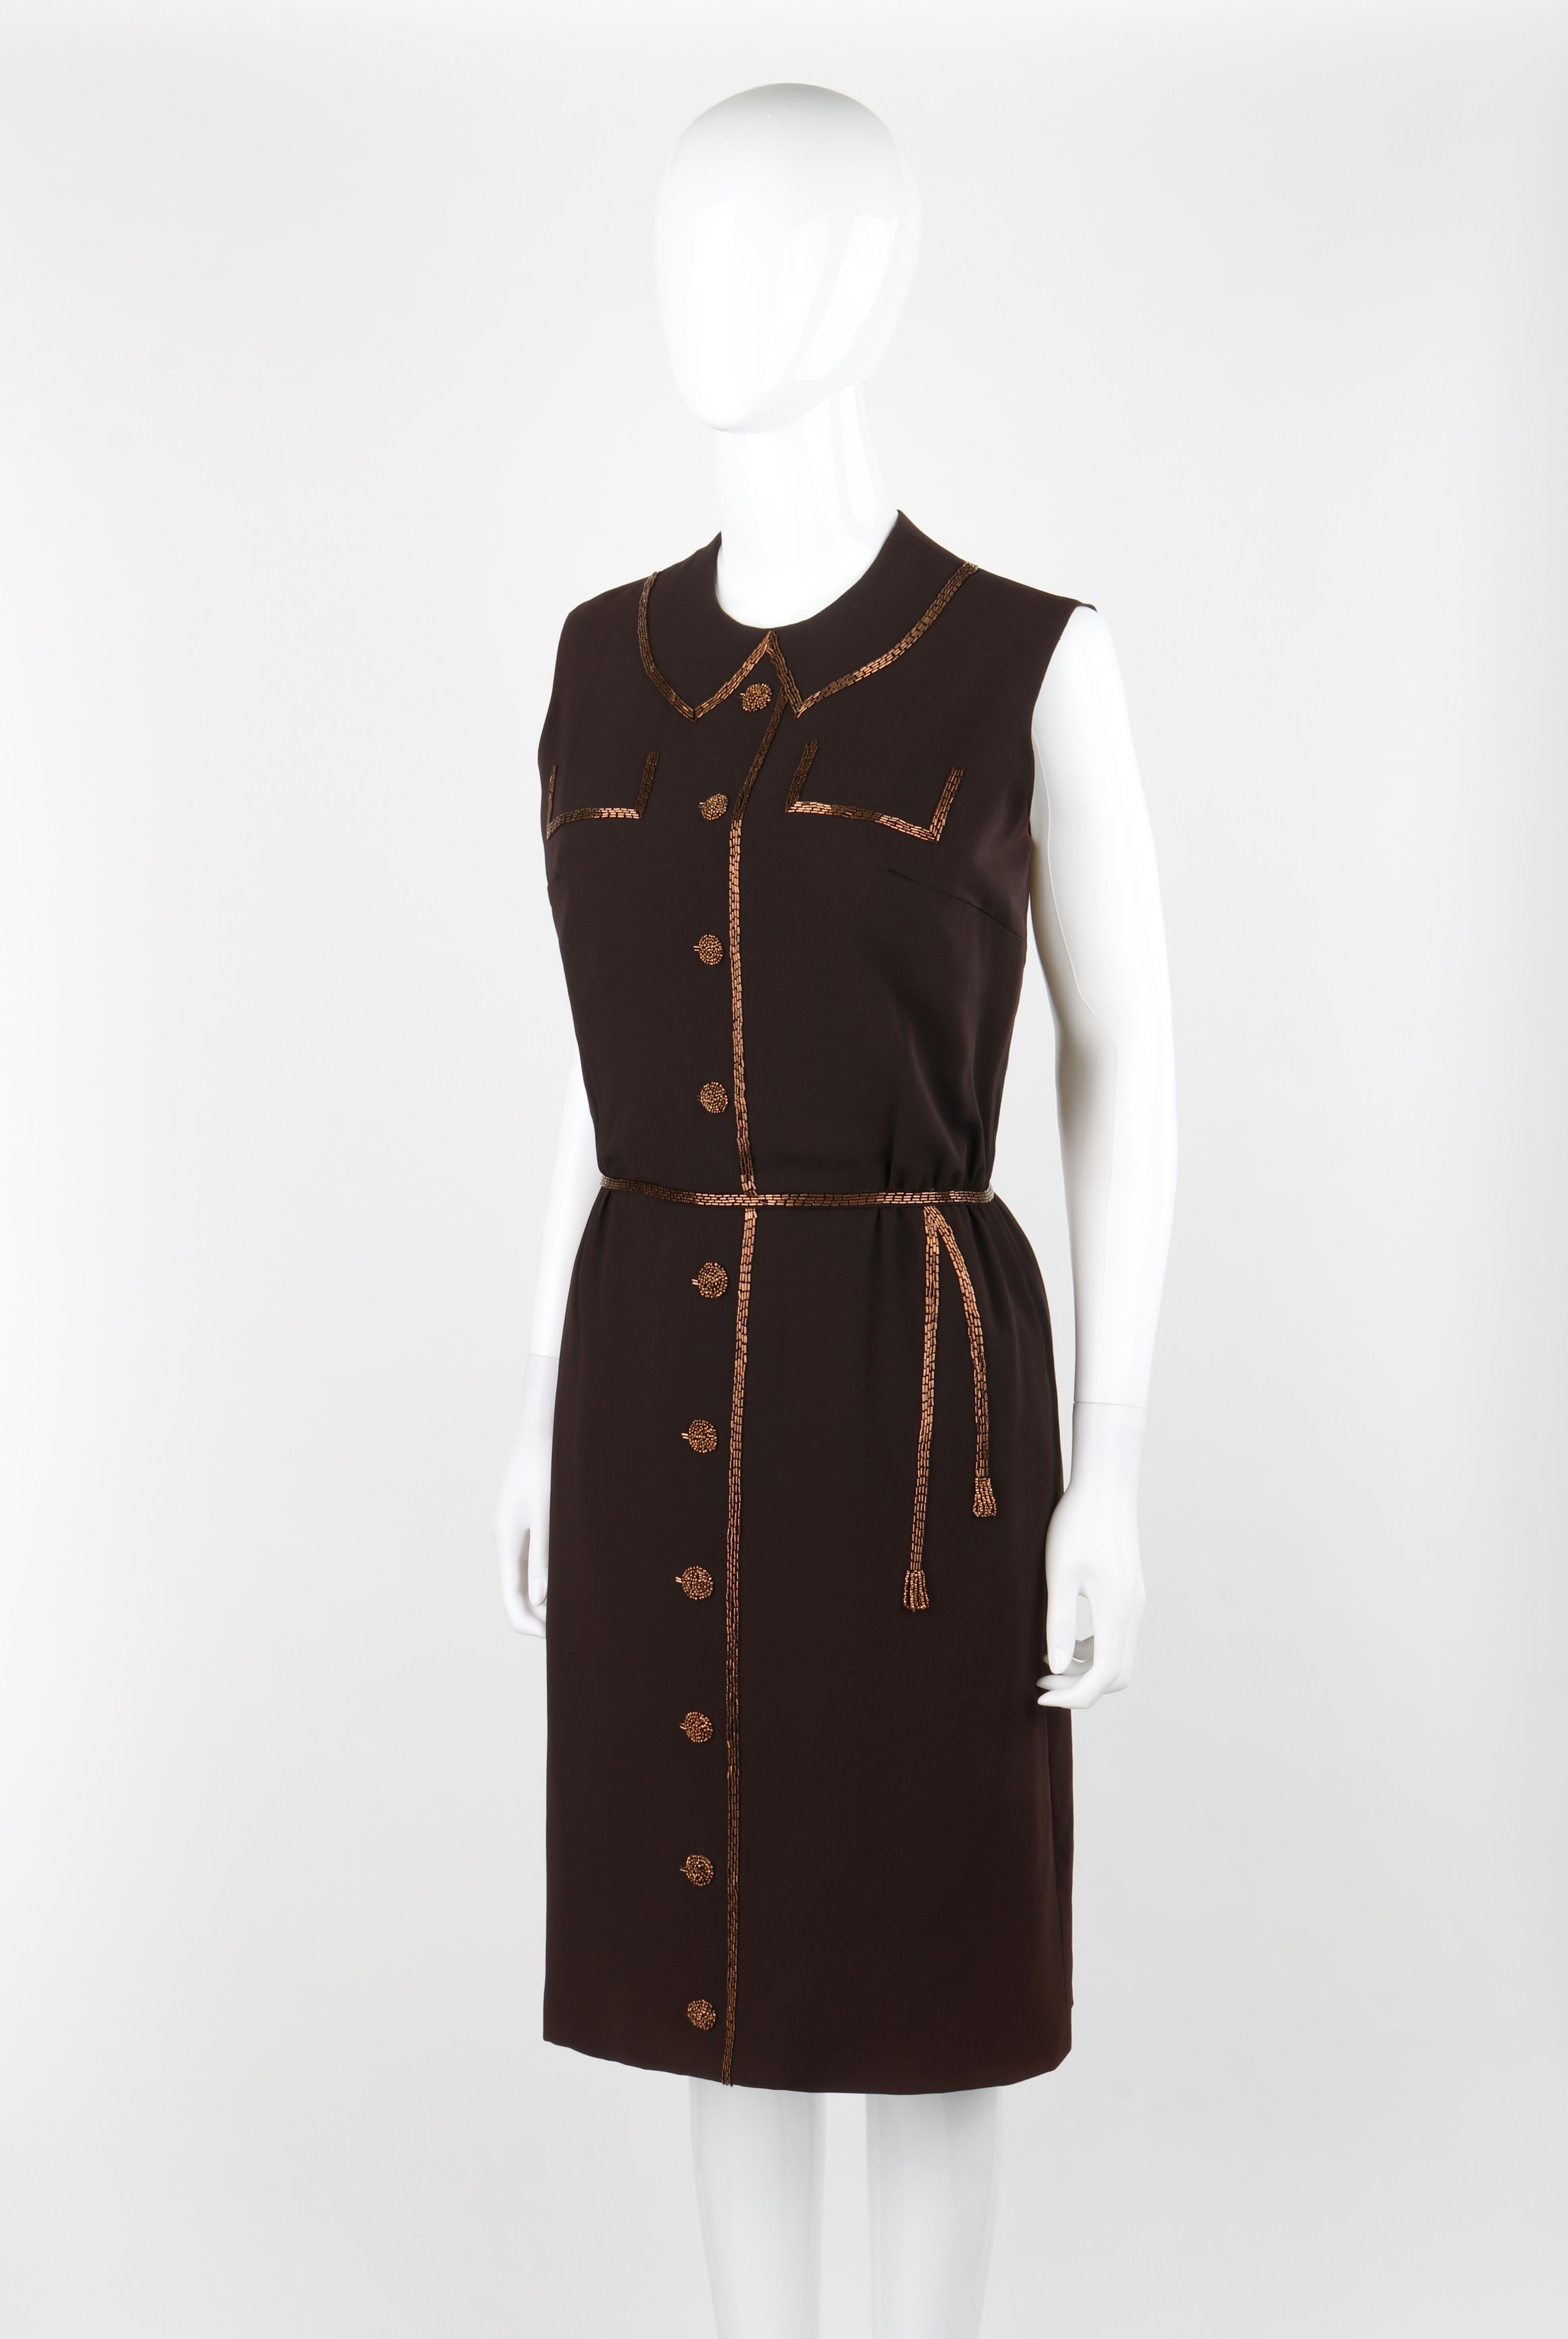 ROBBIE BEE c.1940's Vtg Brown Copper Hand Beaded Accent Trompe-L'oeil Day Dress For Sale 2